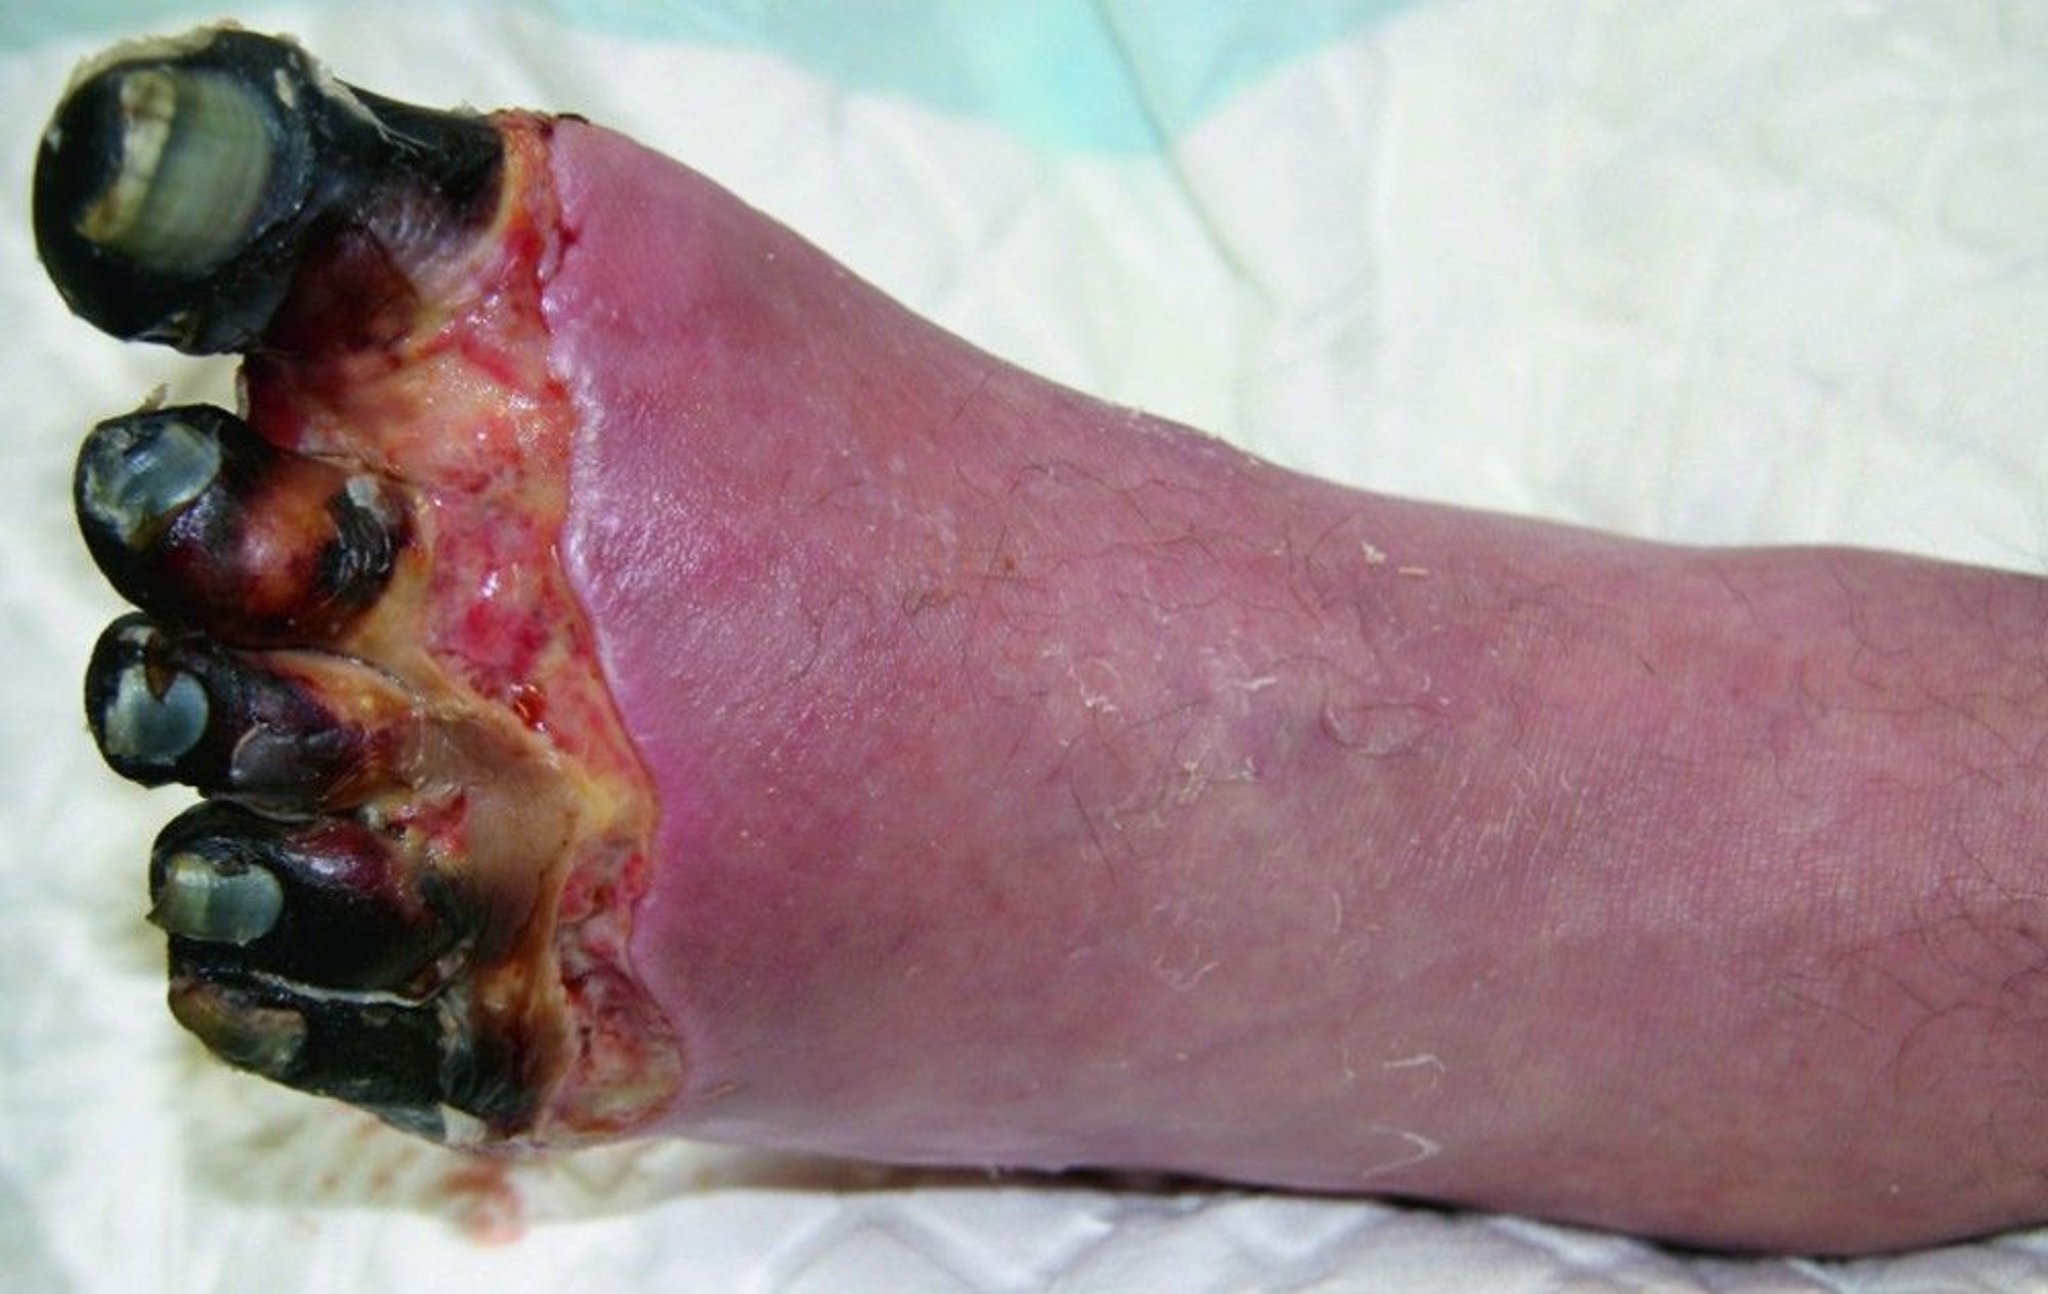 Severe Frostbite of the Foot With Necrosis of the Toes